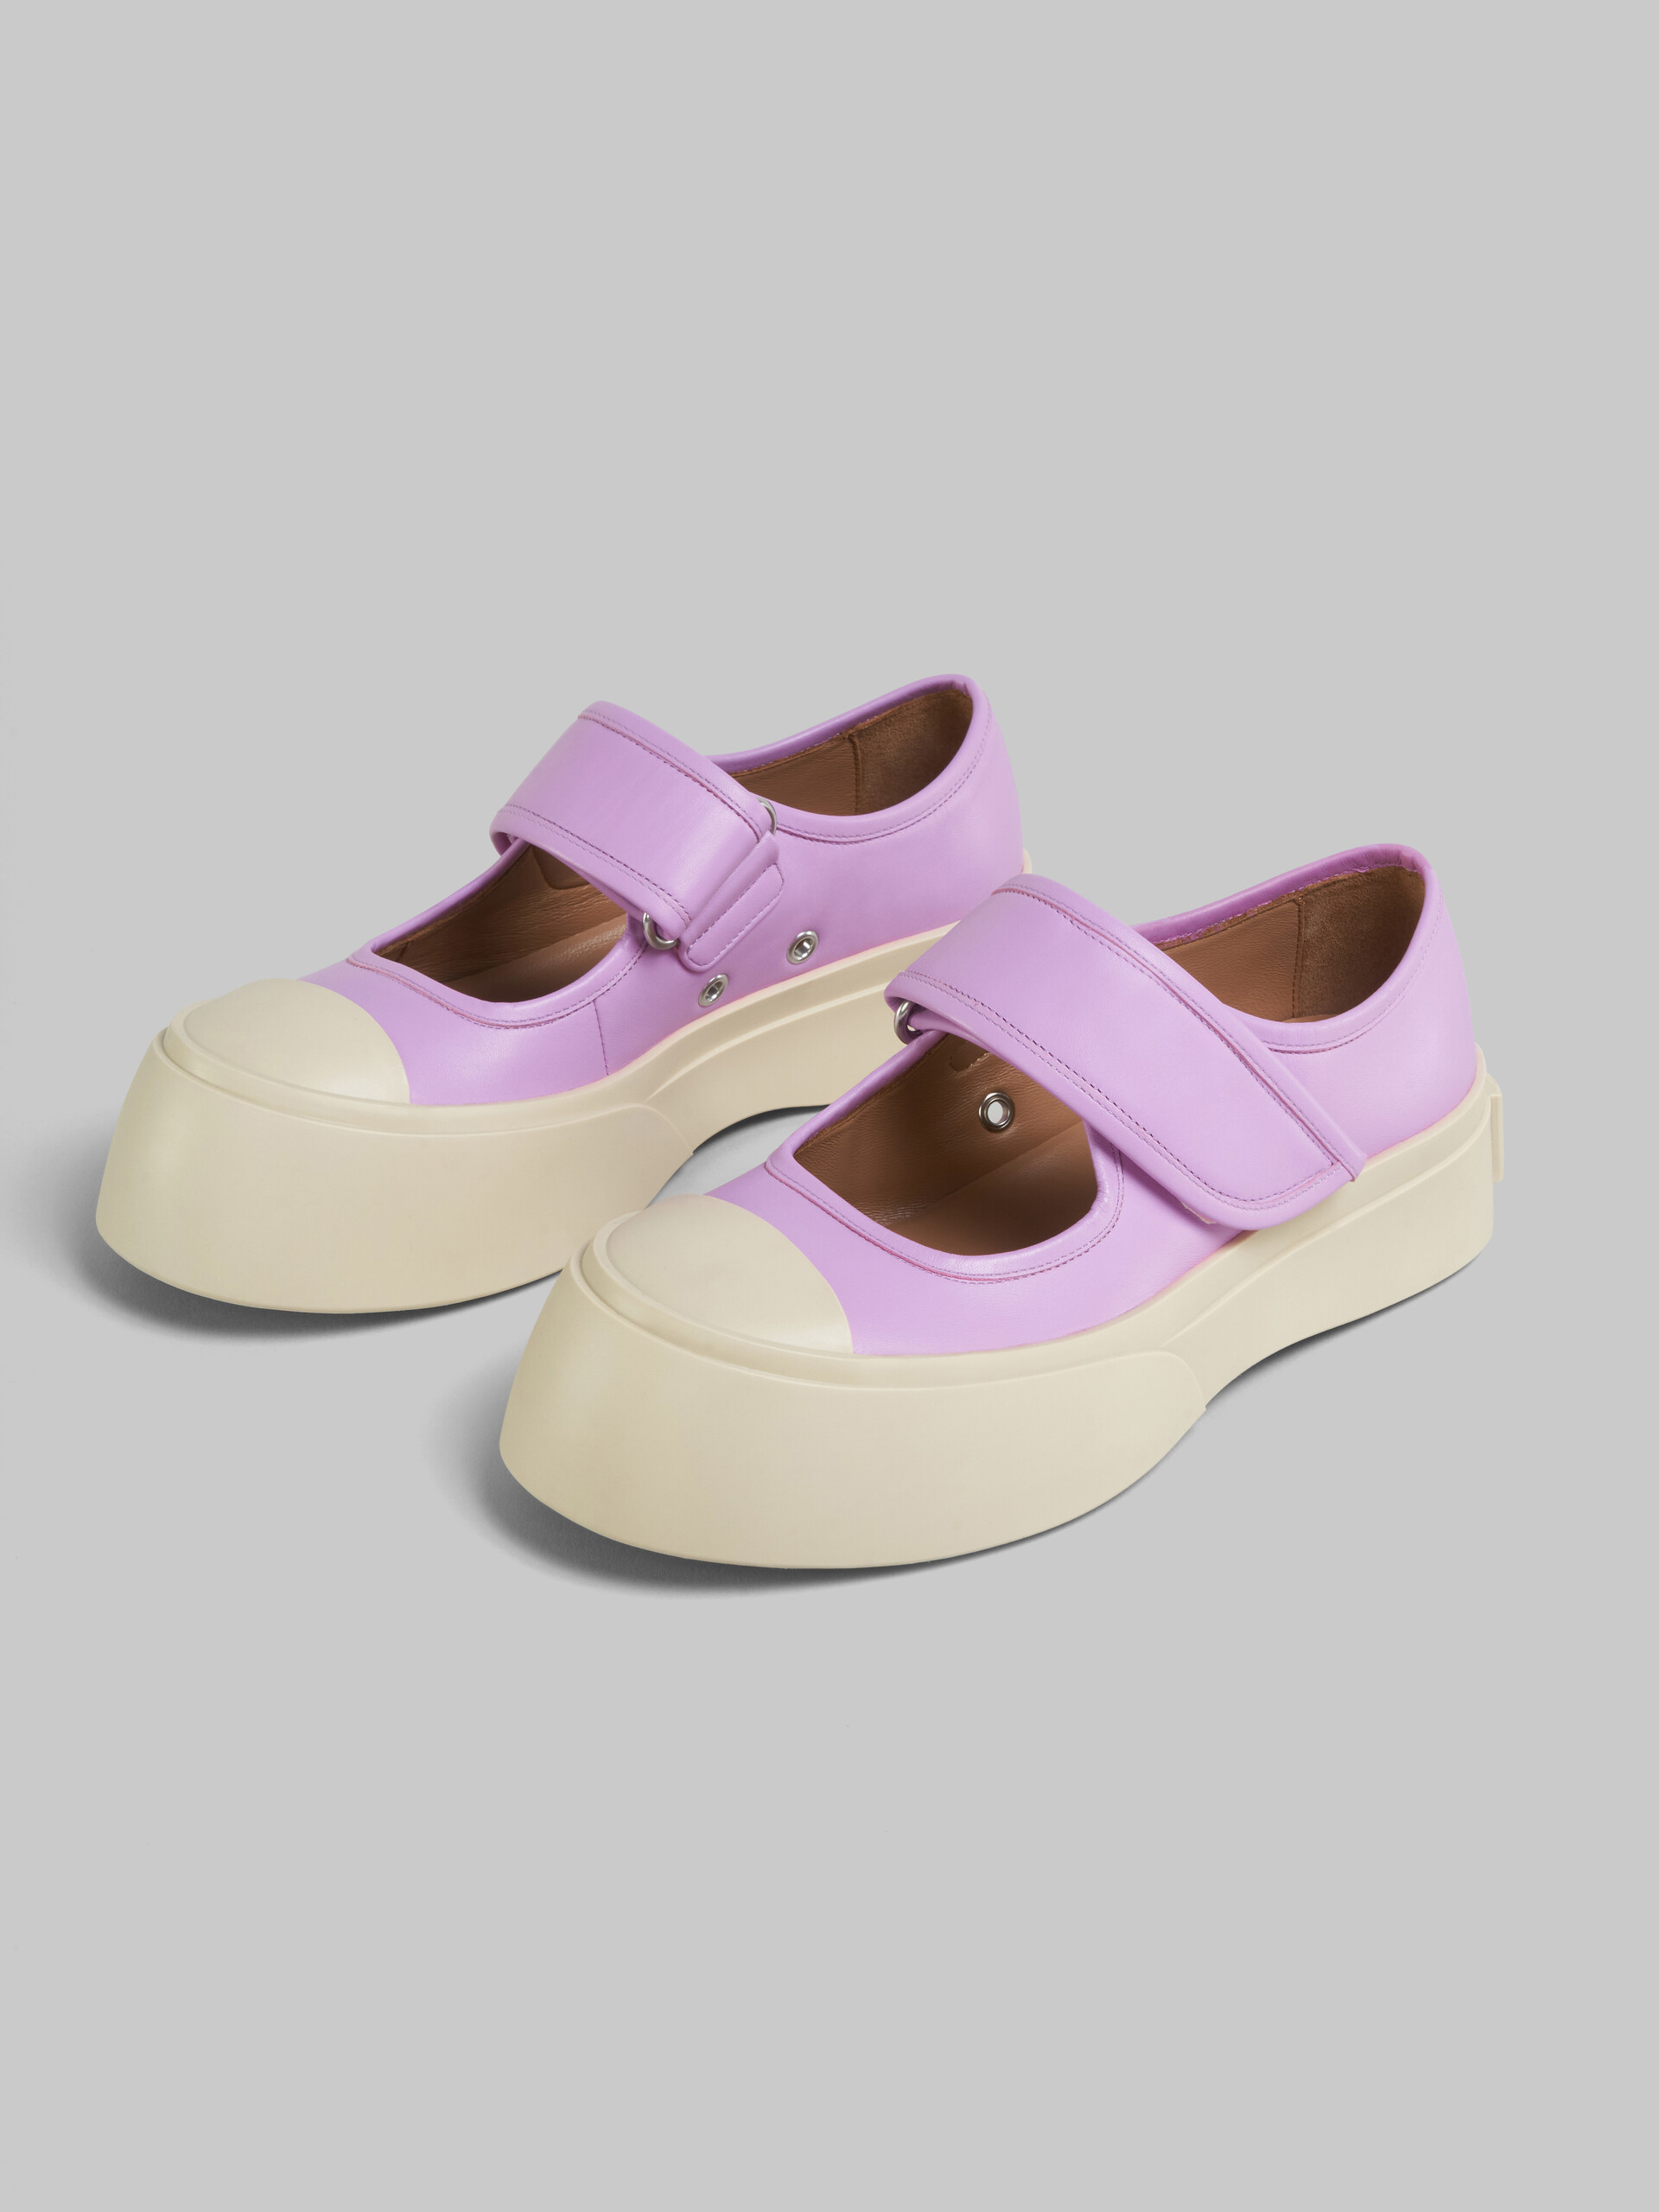 Lilac nappa leather Mary Jane sneaker - Sneakers - Image 5